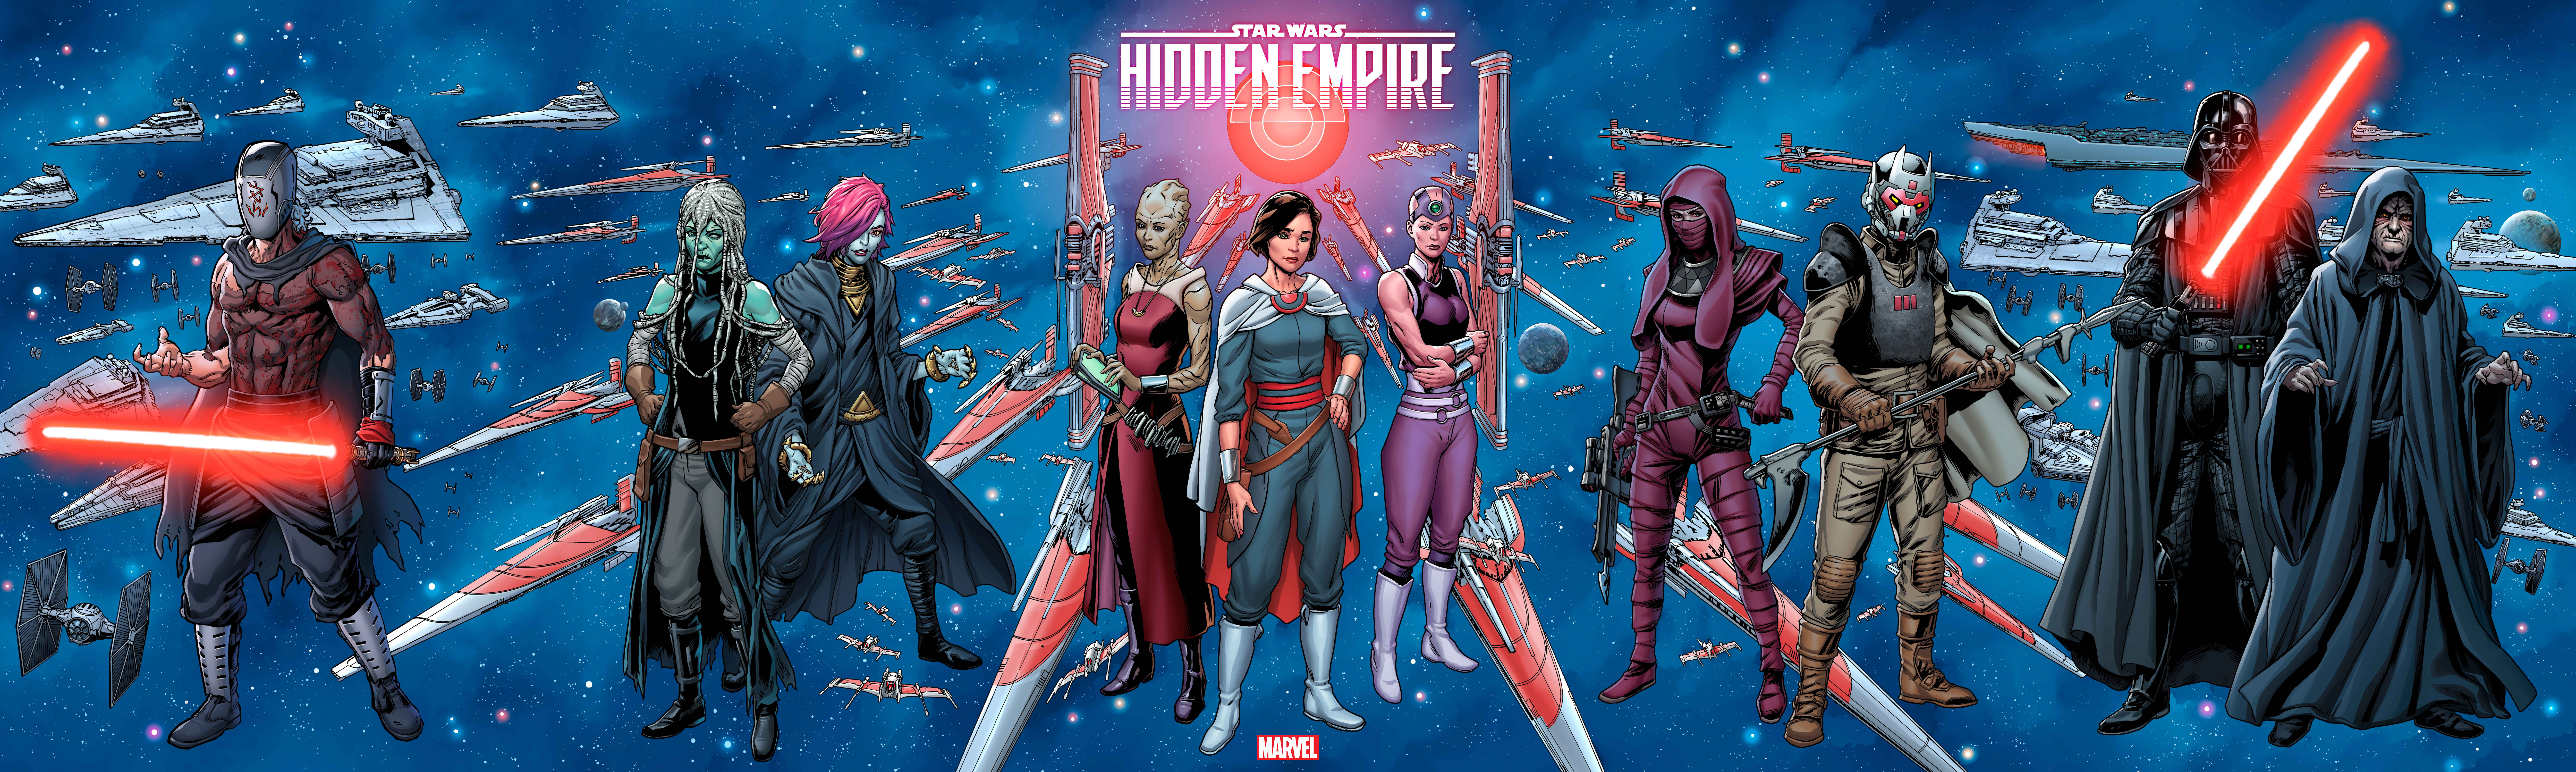 Star Wars: Hidden Empire connecting cover